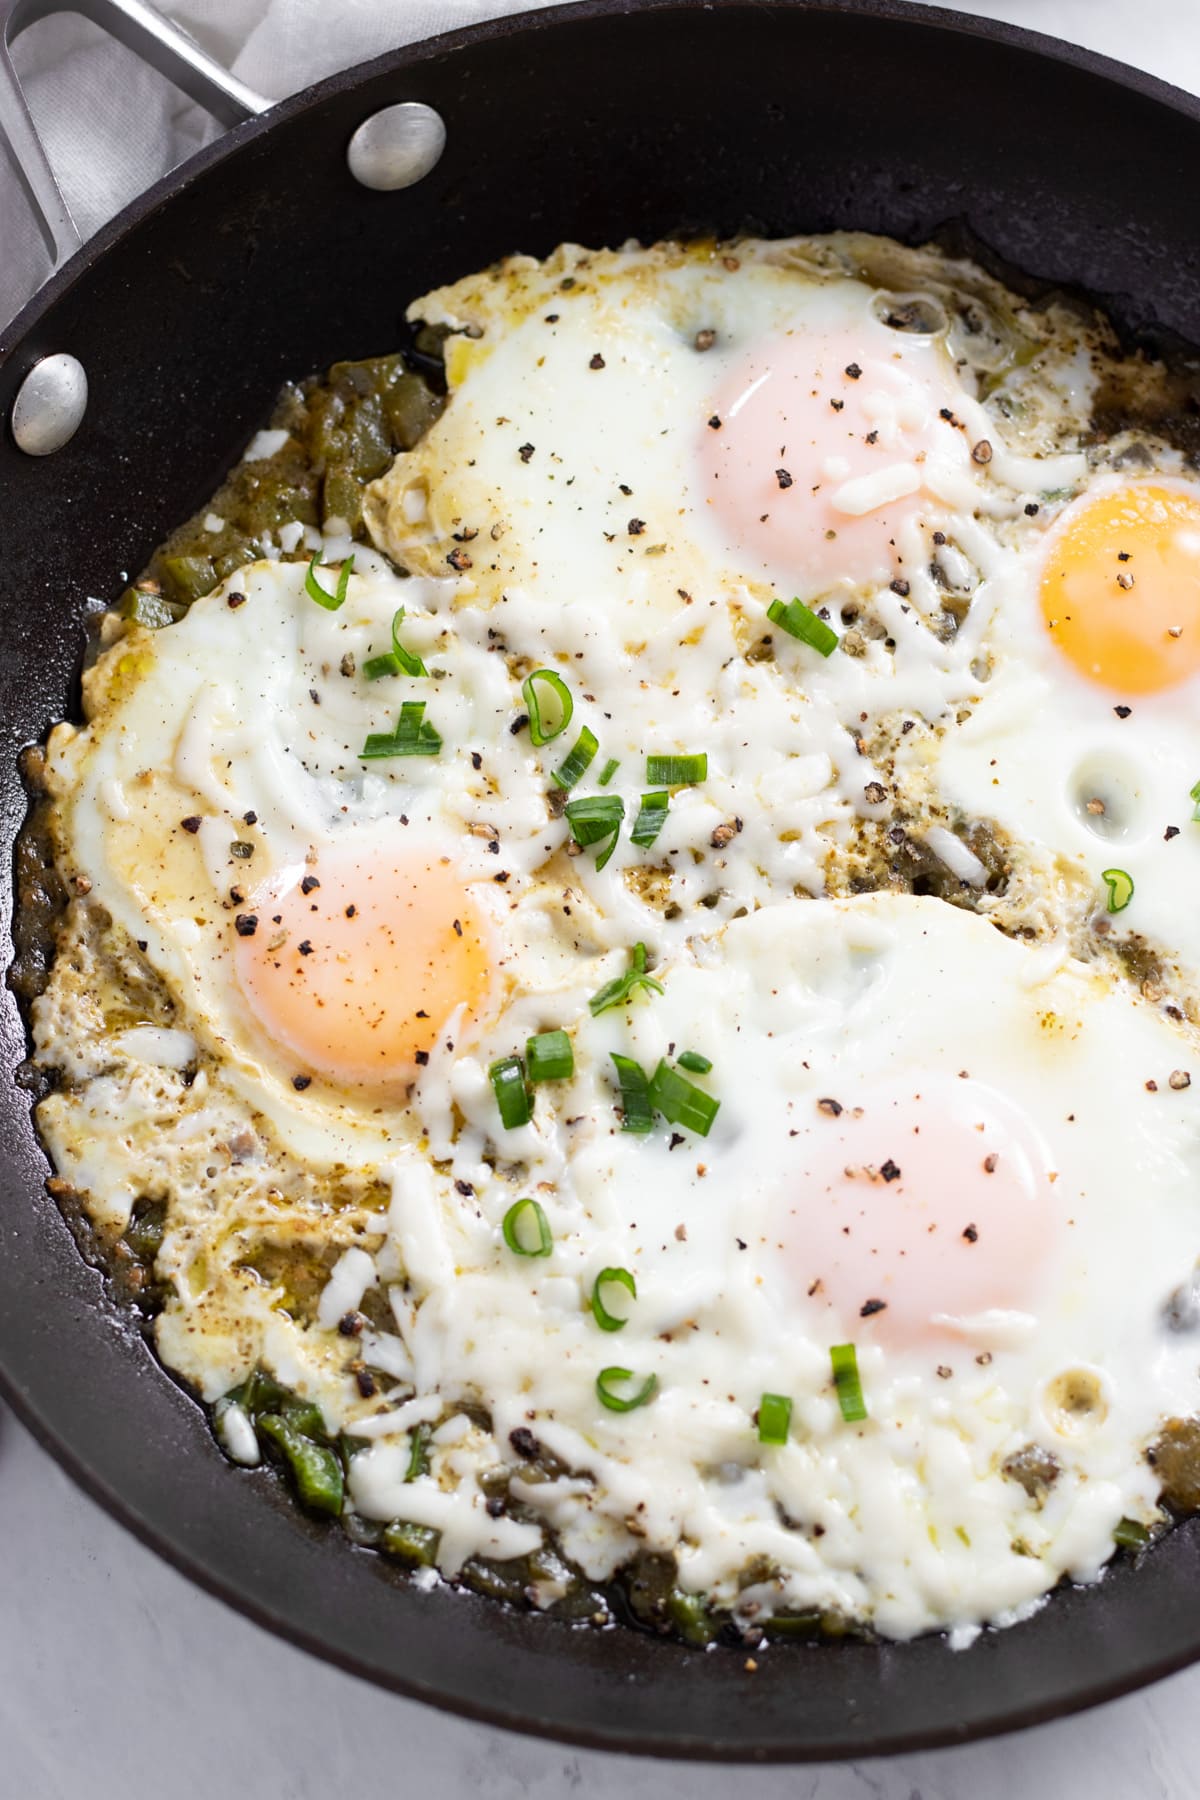 Zoomed into a skillet filled with steam-cooked eggs in salsa verde. The eggs are garnished with sliced green onion tops, melty Oaxaca cheese, and black pepper.